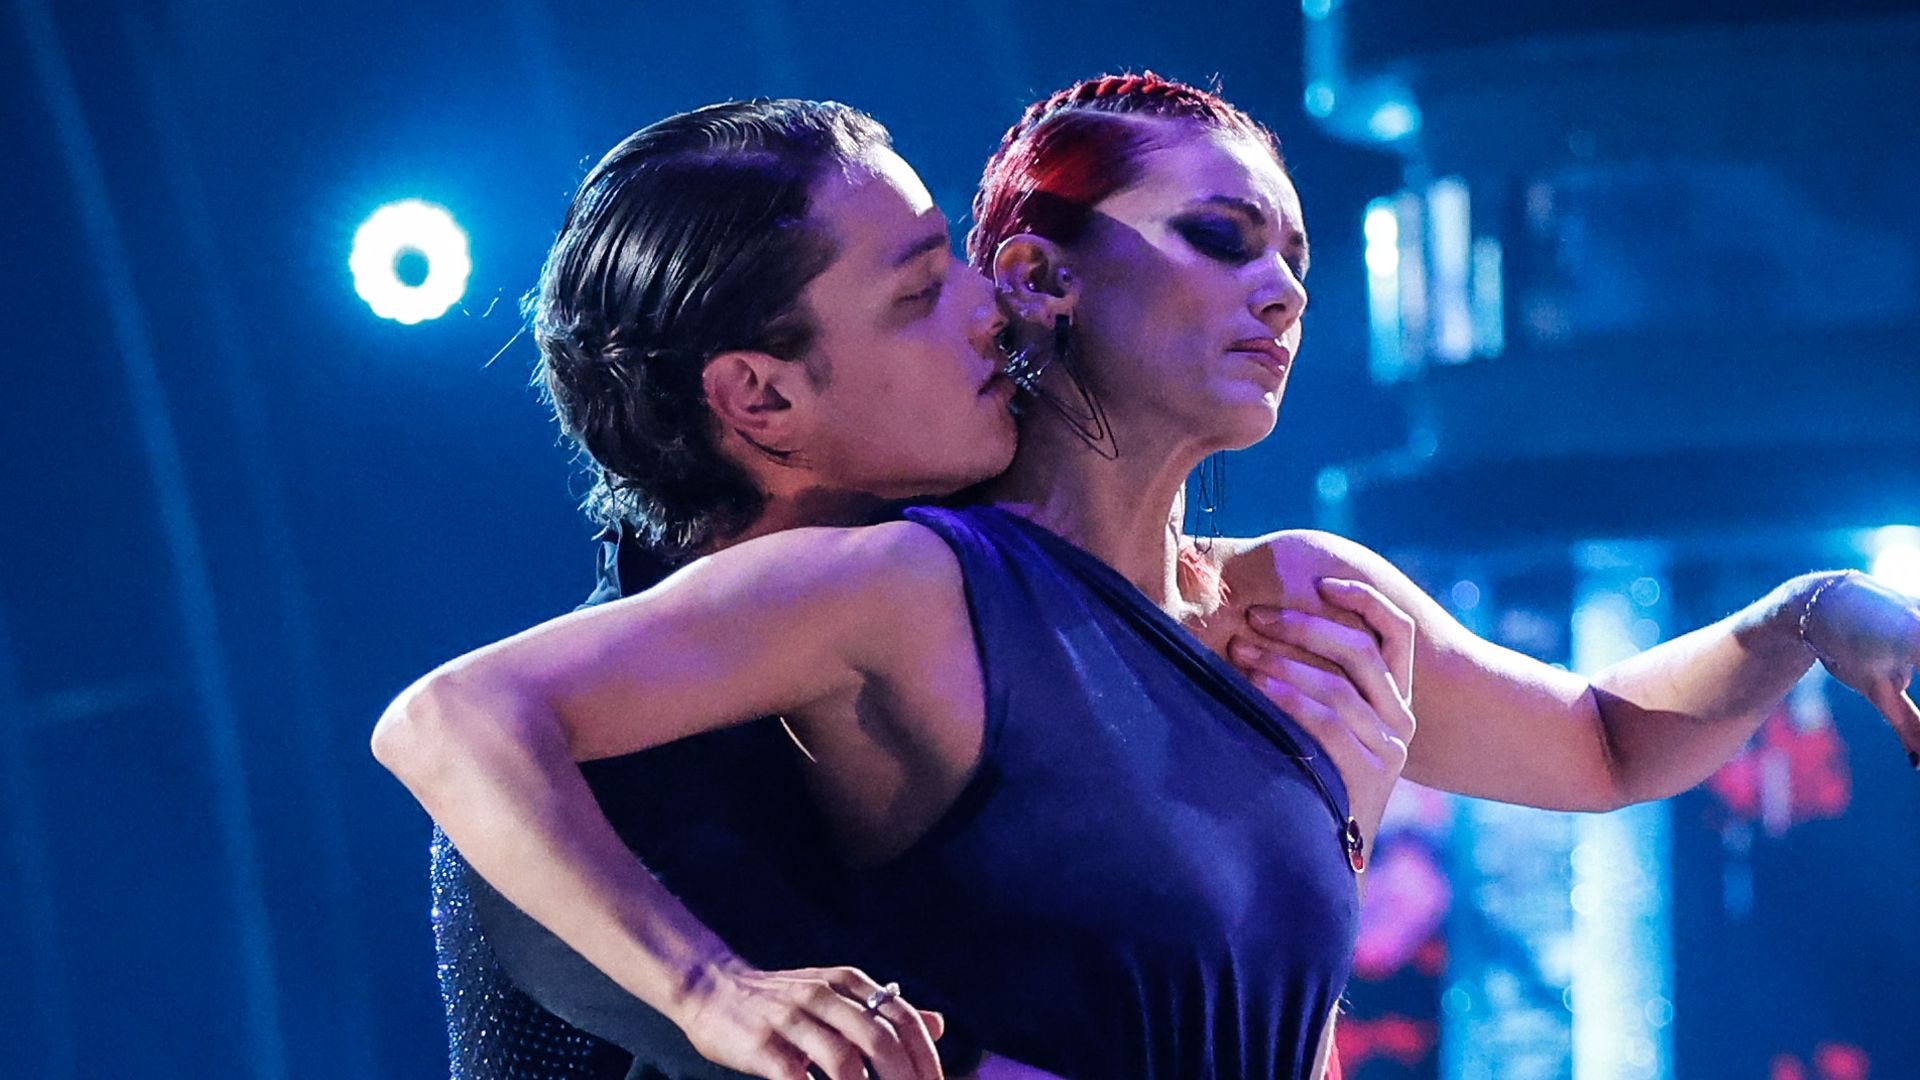 Bobby Brazier and Dianne Buswell dancing the Argentine Tango